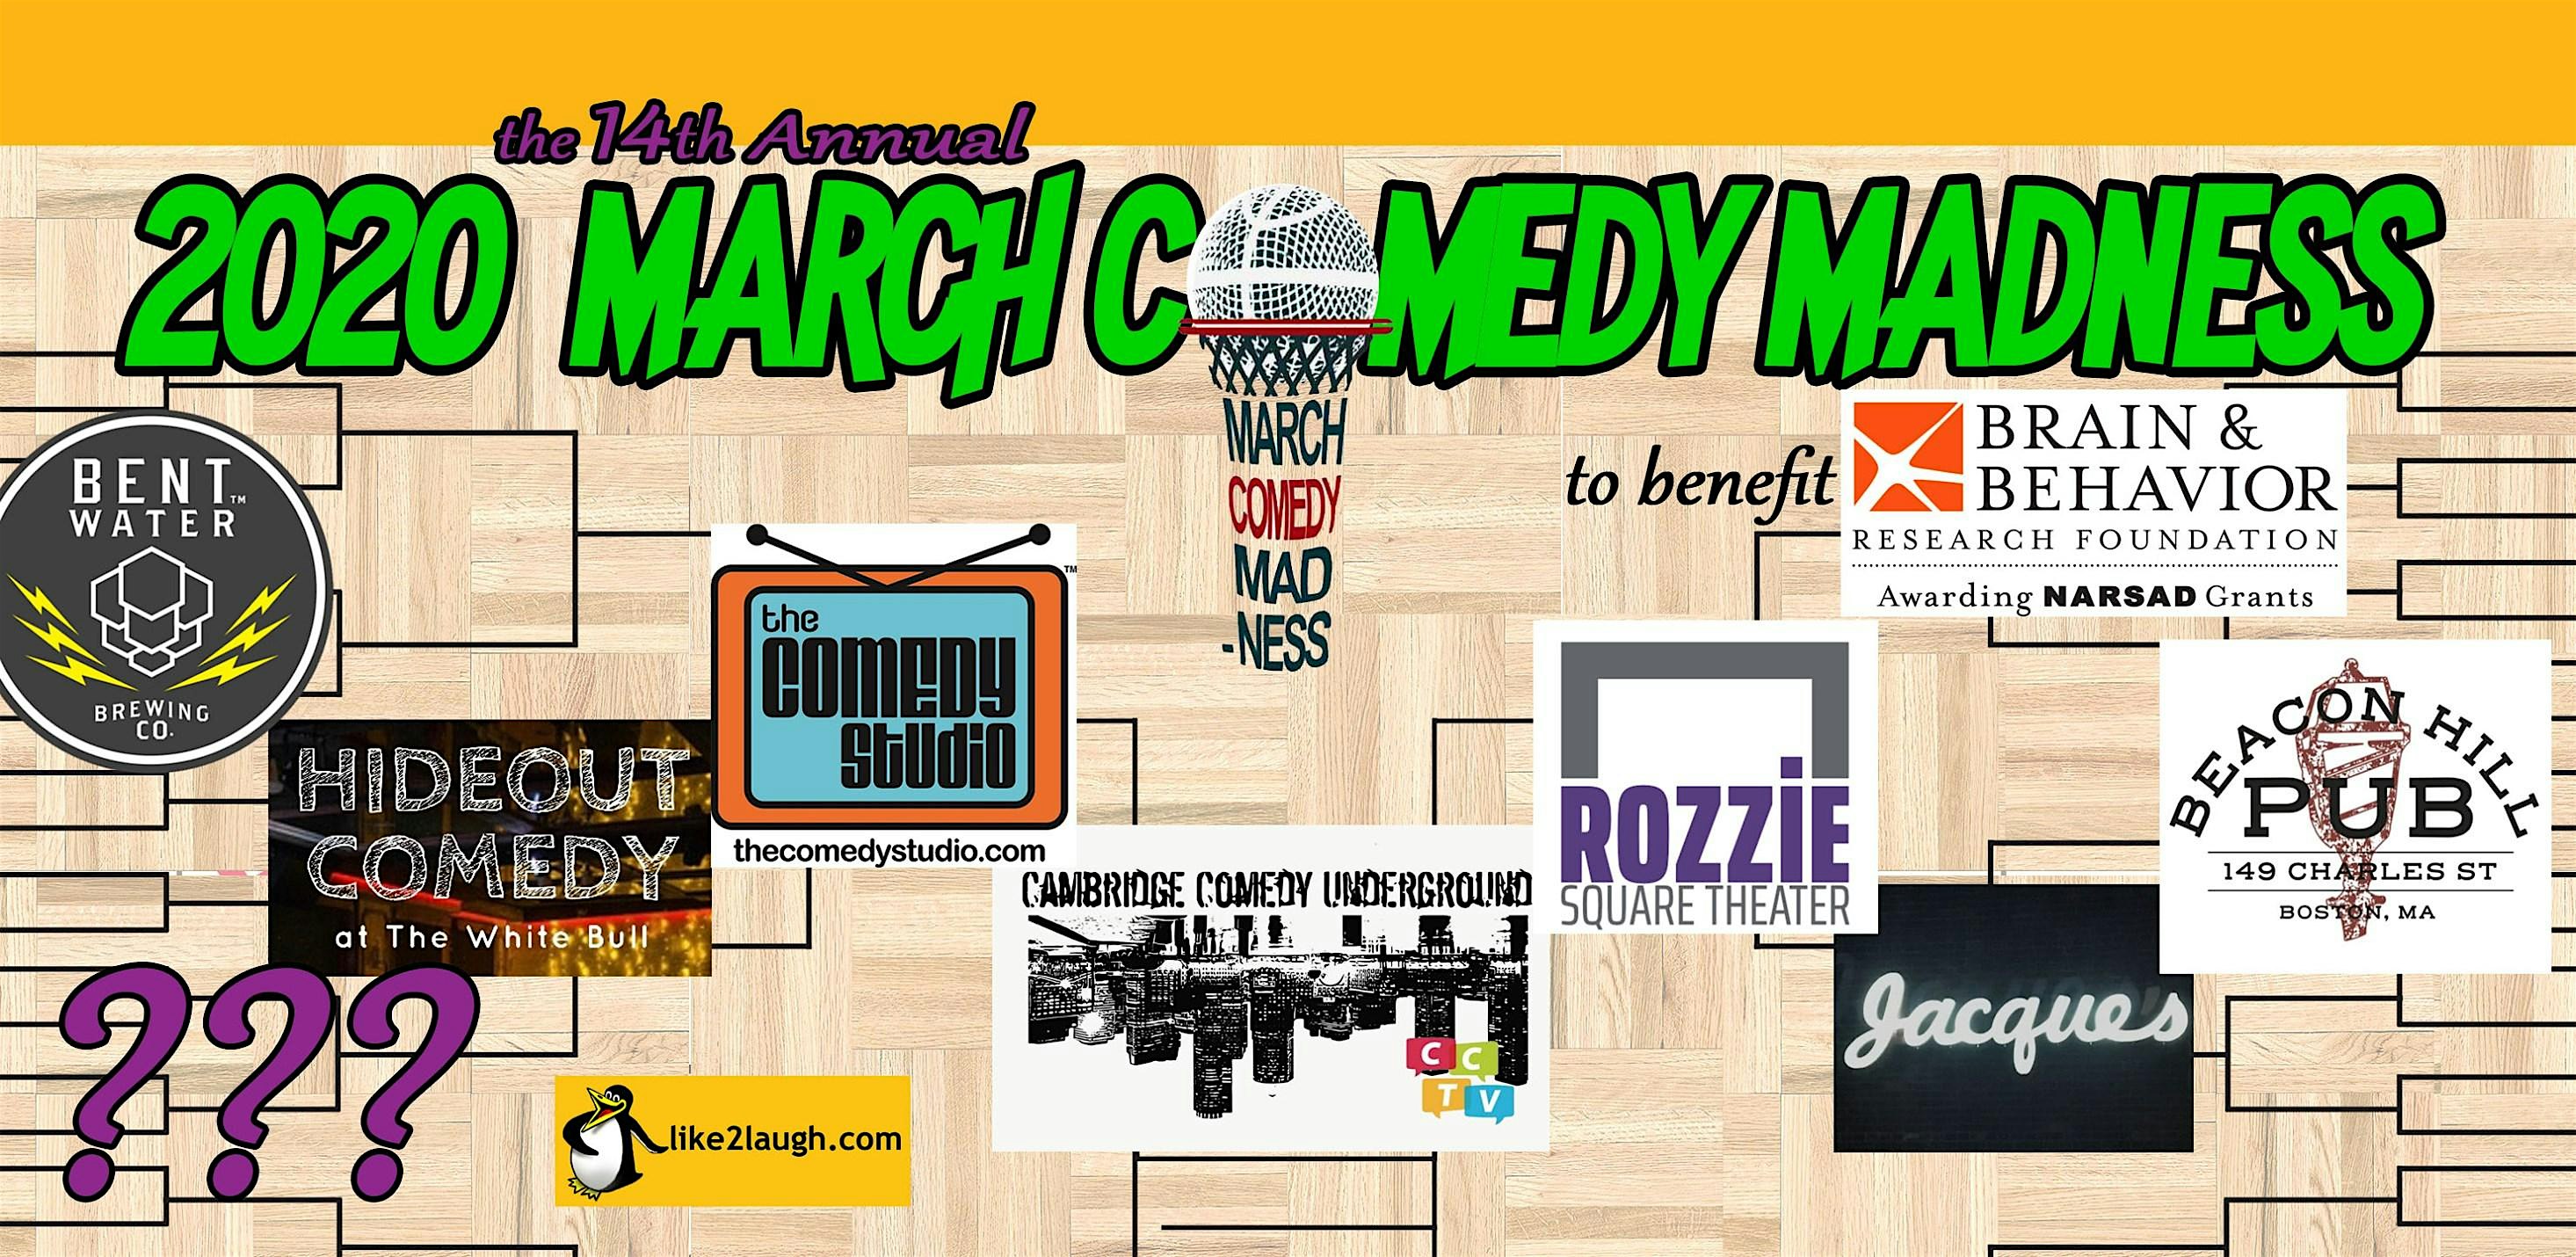 Stand-Up for Mental Health: March Comedy Madness at Rozzie Sq